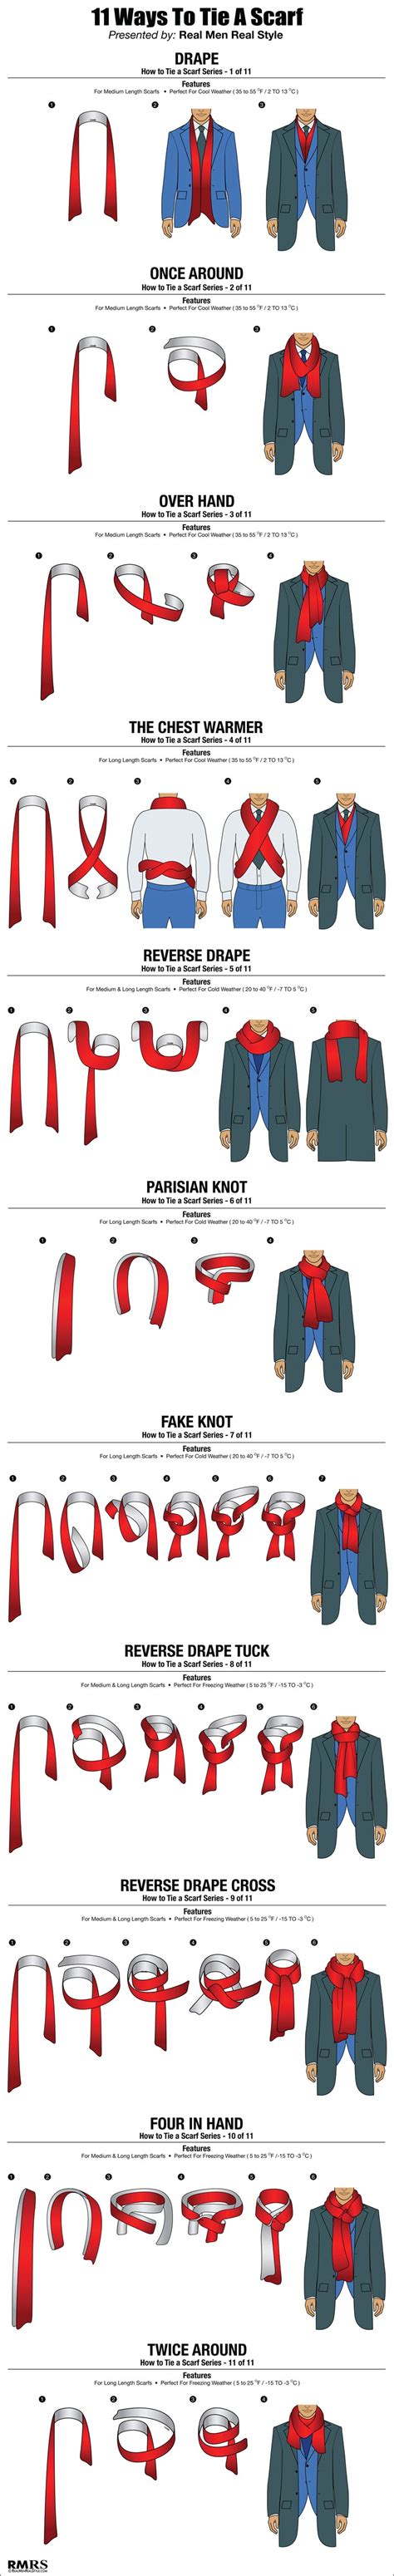 11 ways to tie a scarf in one chart huffpost